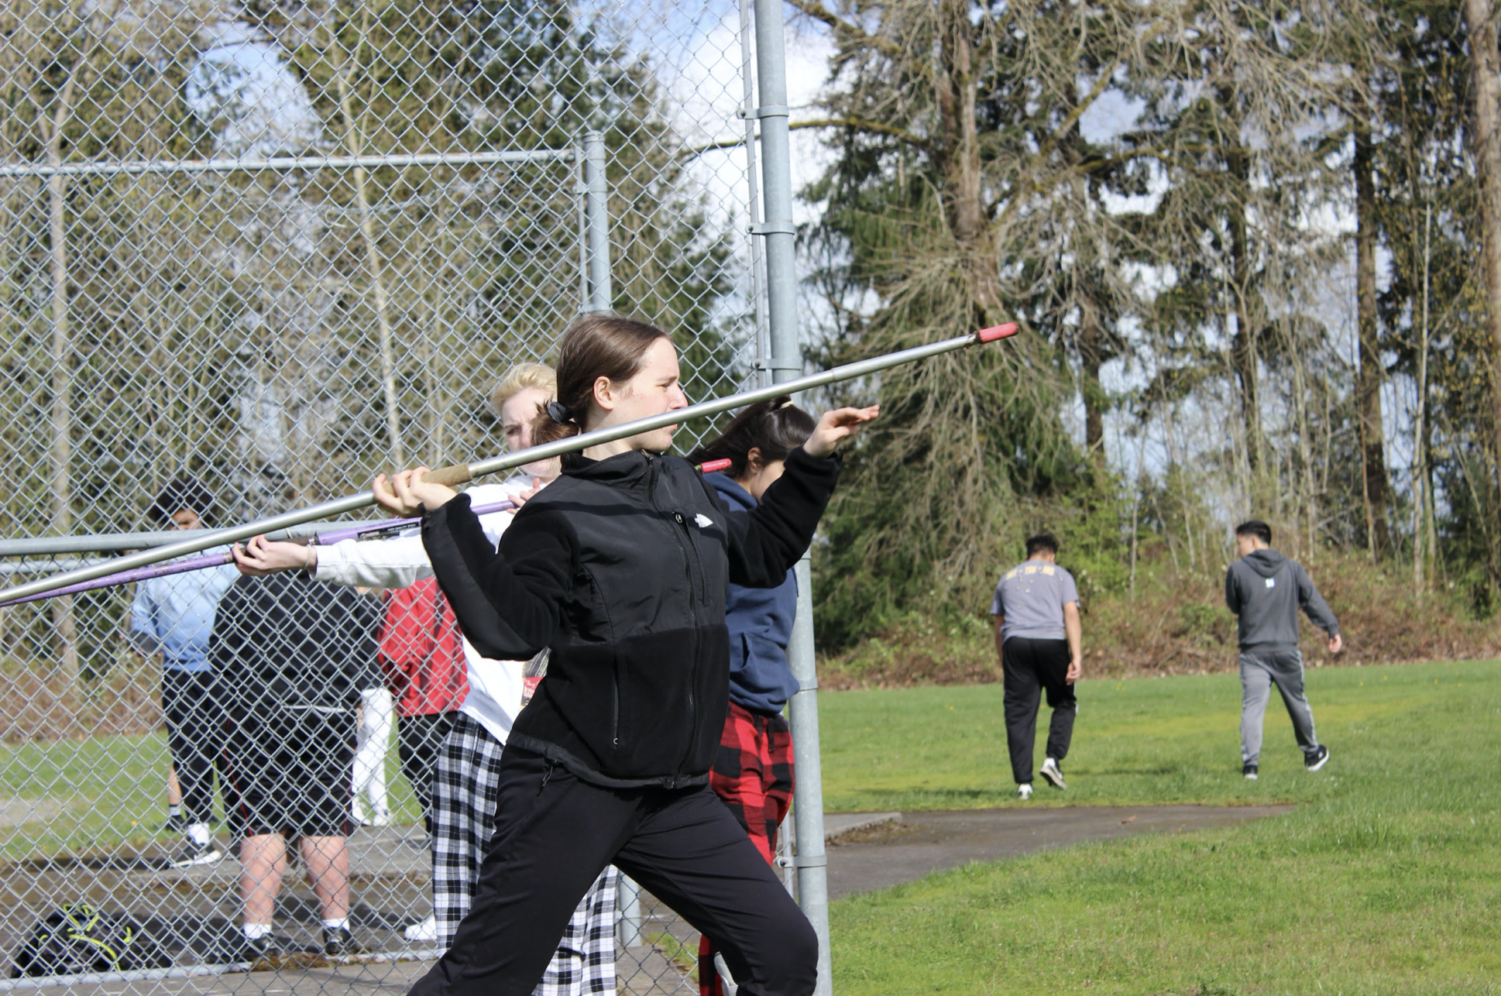 %0AFreshman+JayJay+Maclean+poses+to+throw+a+javelin+at+a+practice+on+April+4.